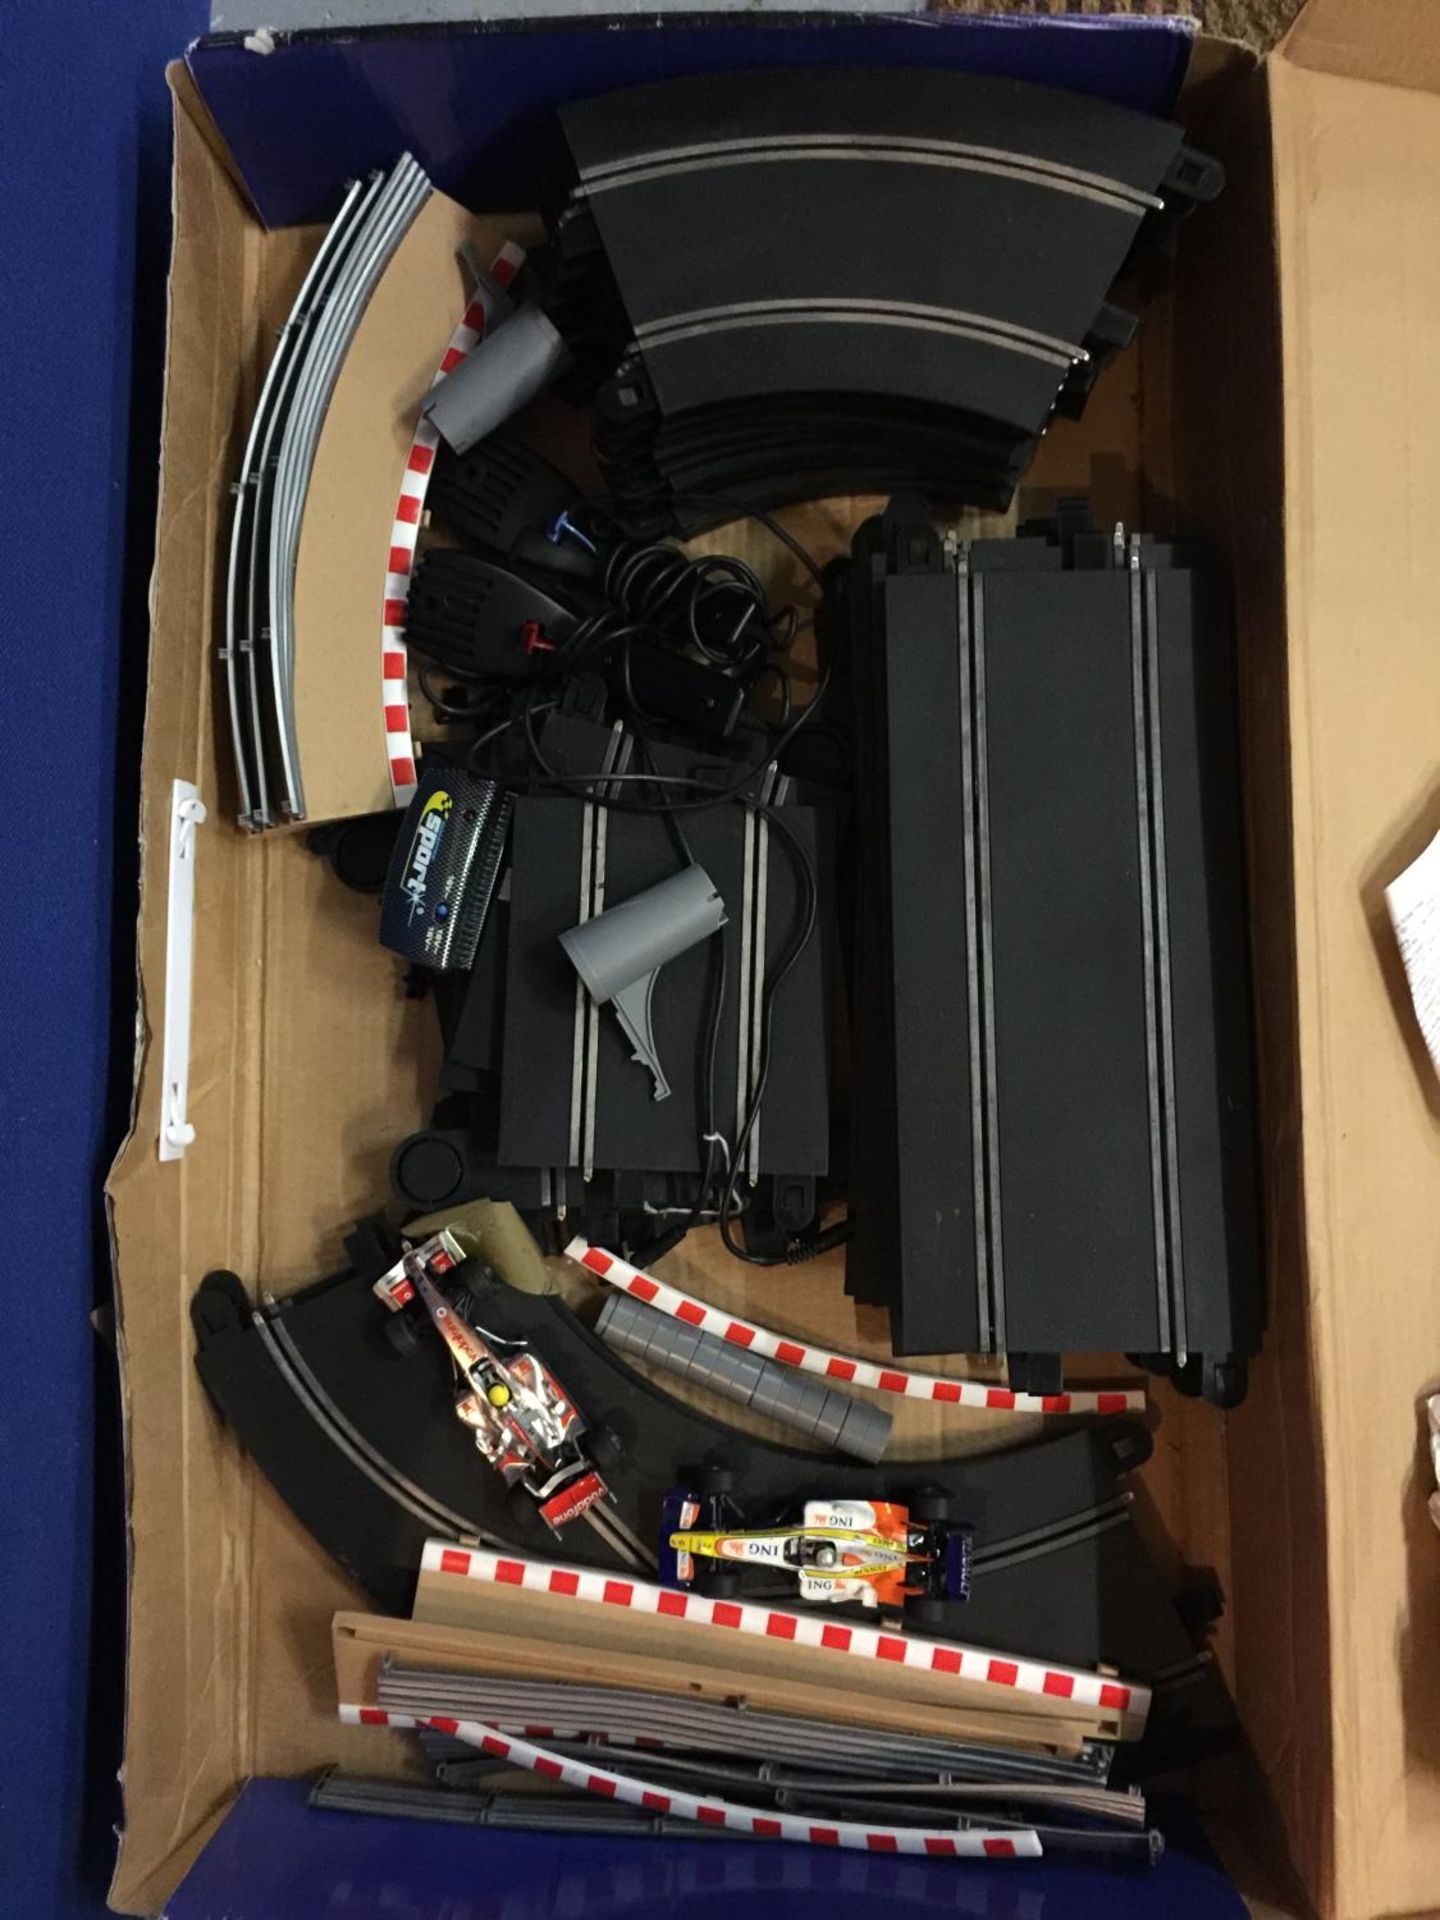 A F1 SCALEXTRIC SET INCLUDING TRACK, KERBING BARRIERS, CONTROLLERS ETC. BOTH CARS ARE A/F FOR SPARES - Image 2 of 5